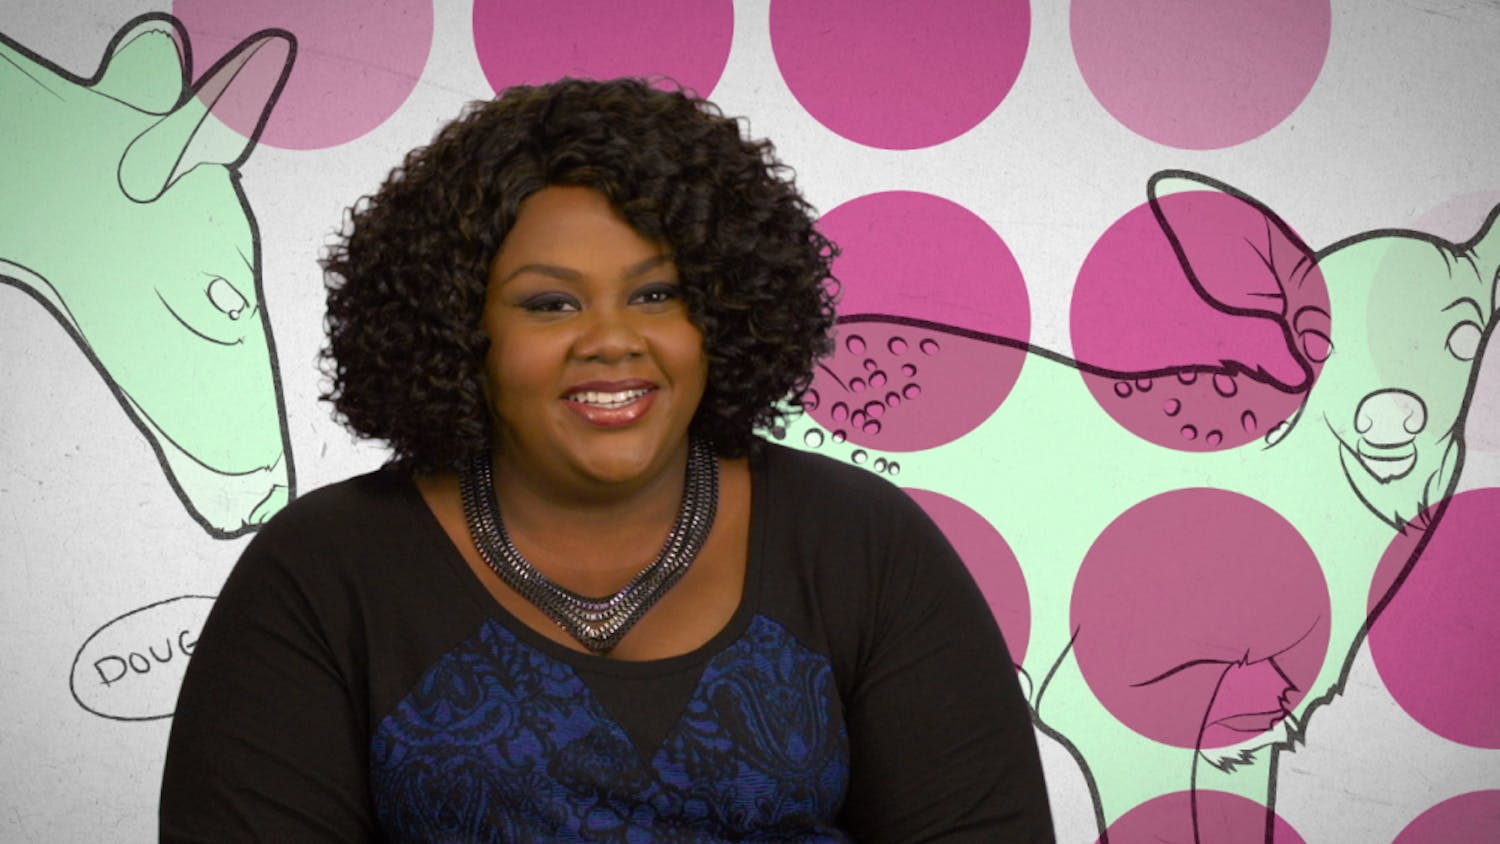 Nicole Byer of MTV’s “Girl Code” will be at the Reitz Union Grand Ballroom Friday at 9 p.m. as part of the all-female trio comedy improv group, Cat Ladies.